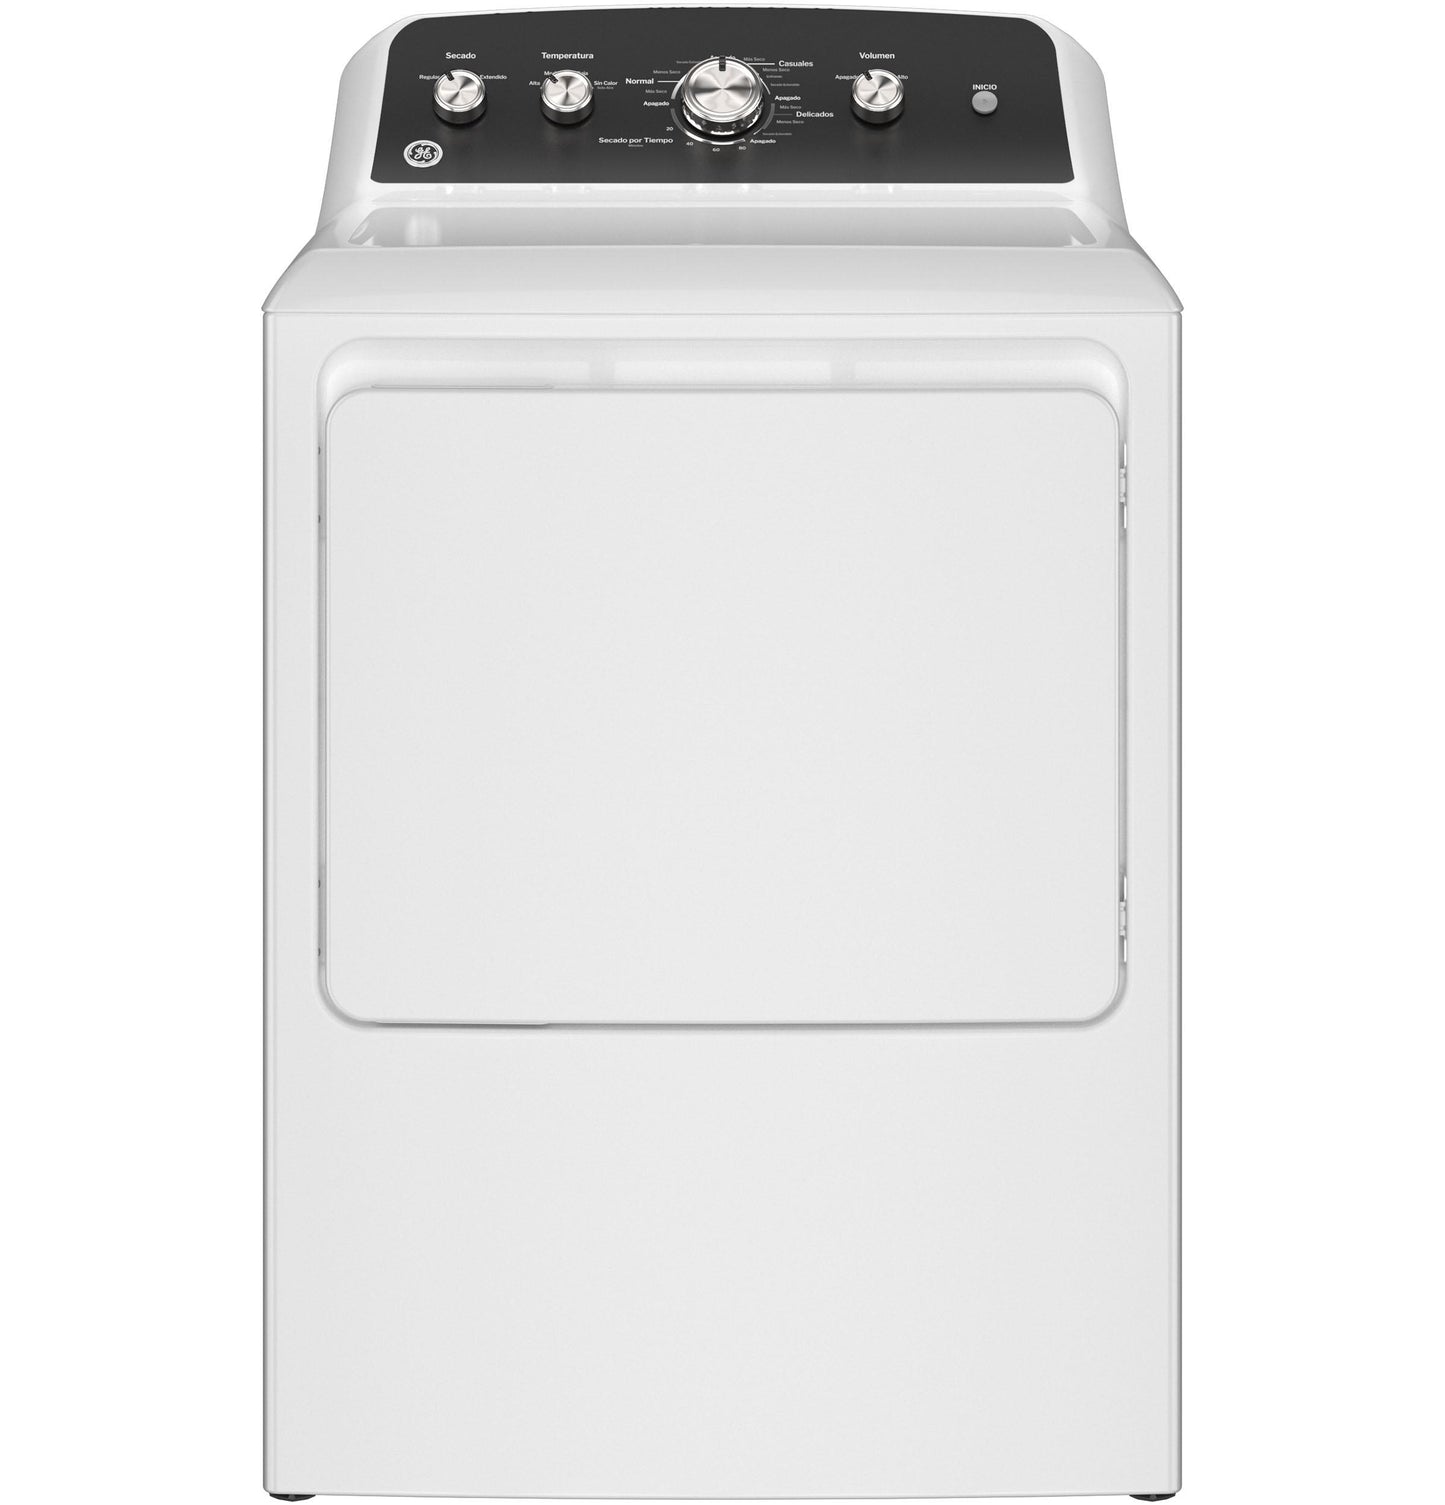 Ge Appliances ETD48EASWWB Ge® 7.2 Cu. Ft. Capacity&#X00A0;Electric&#X00A0;Dryer&#X00A0;With Spanish Panel And Up To 120 Ft. Venting&#X200B;